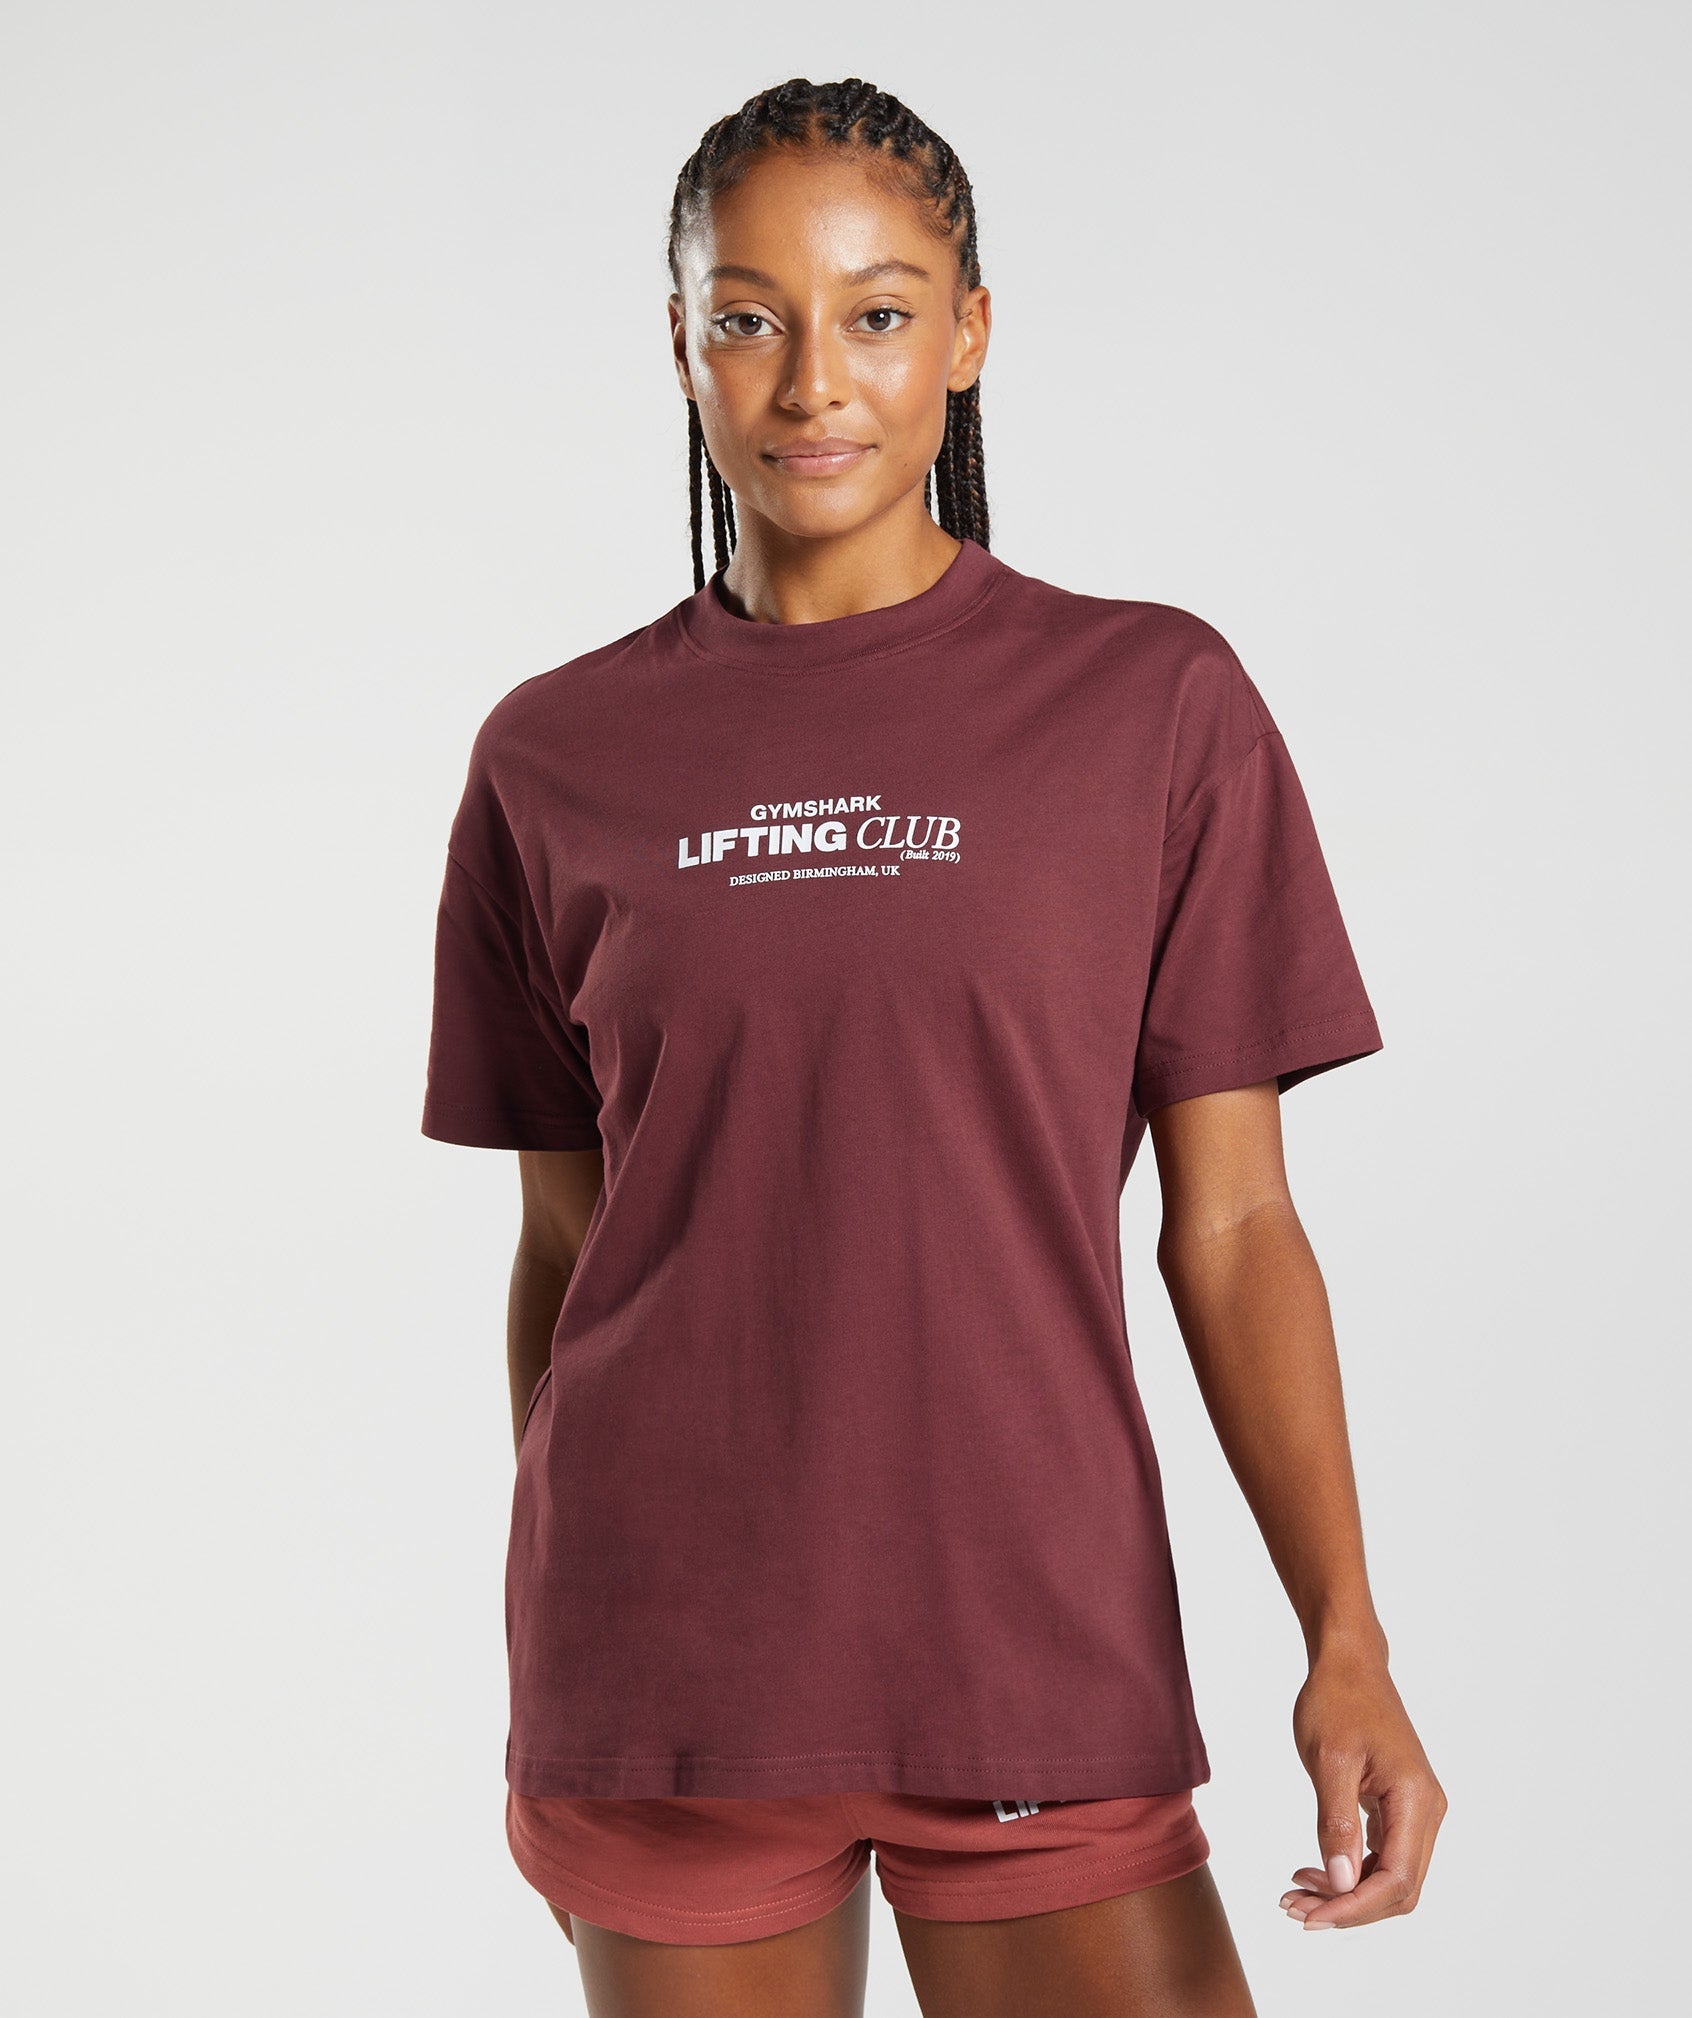 Gymshark Cherry Athletic T-Shirts for Women